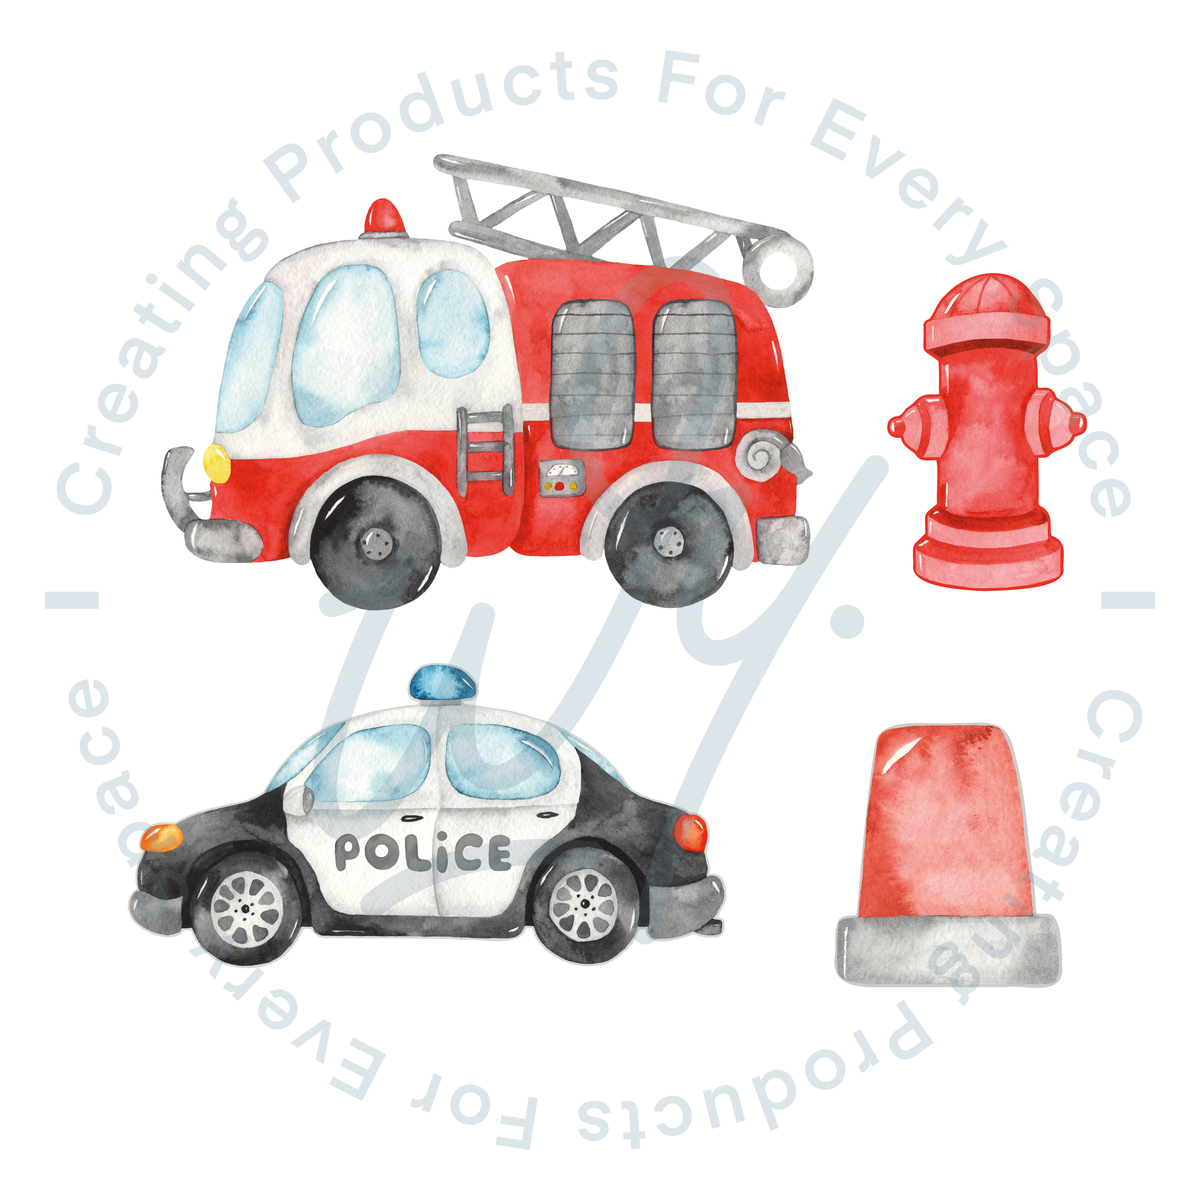 Police Car and Fire Engine Wall Decal Set